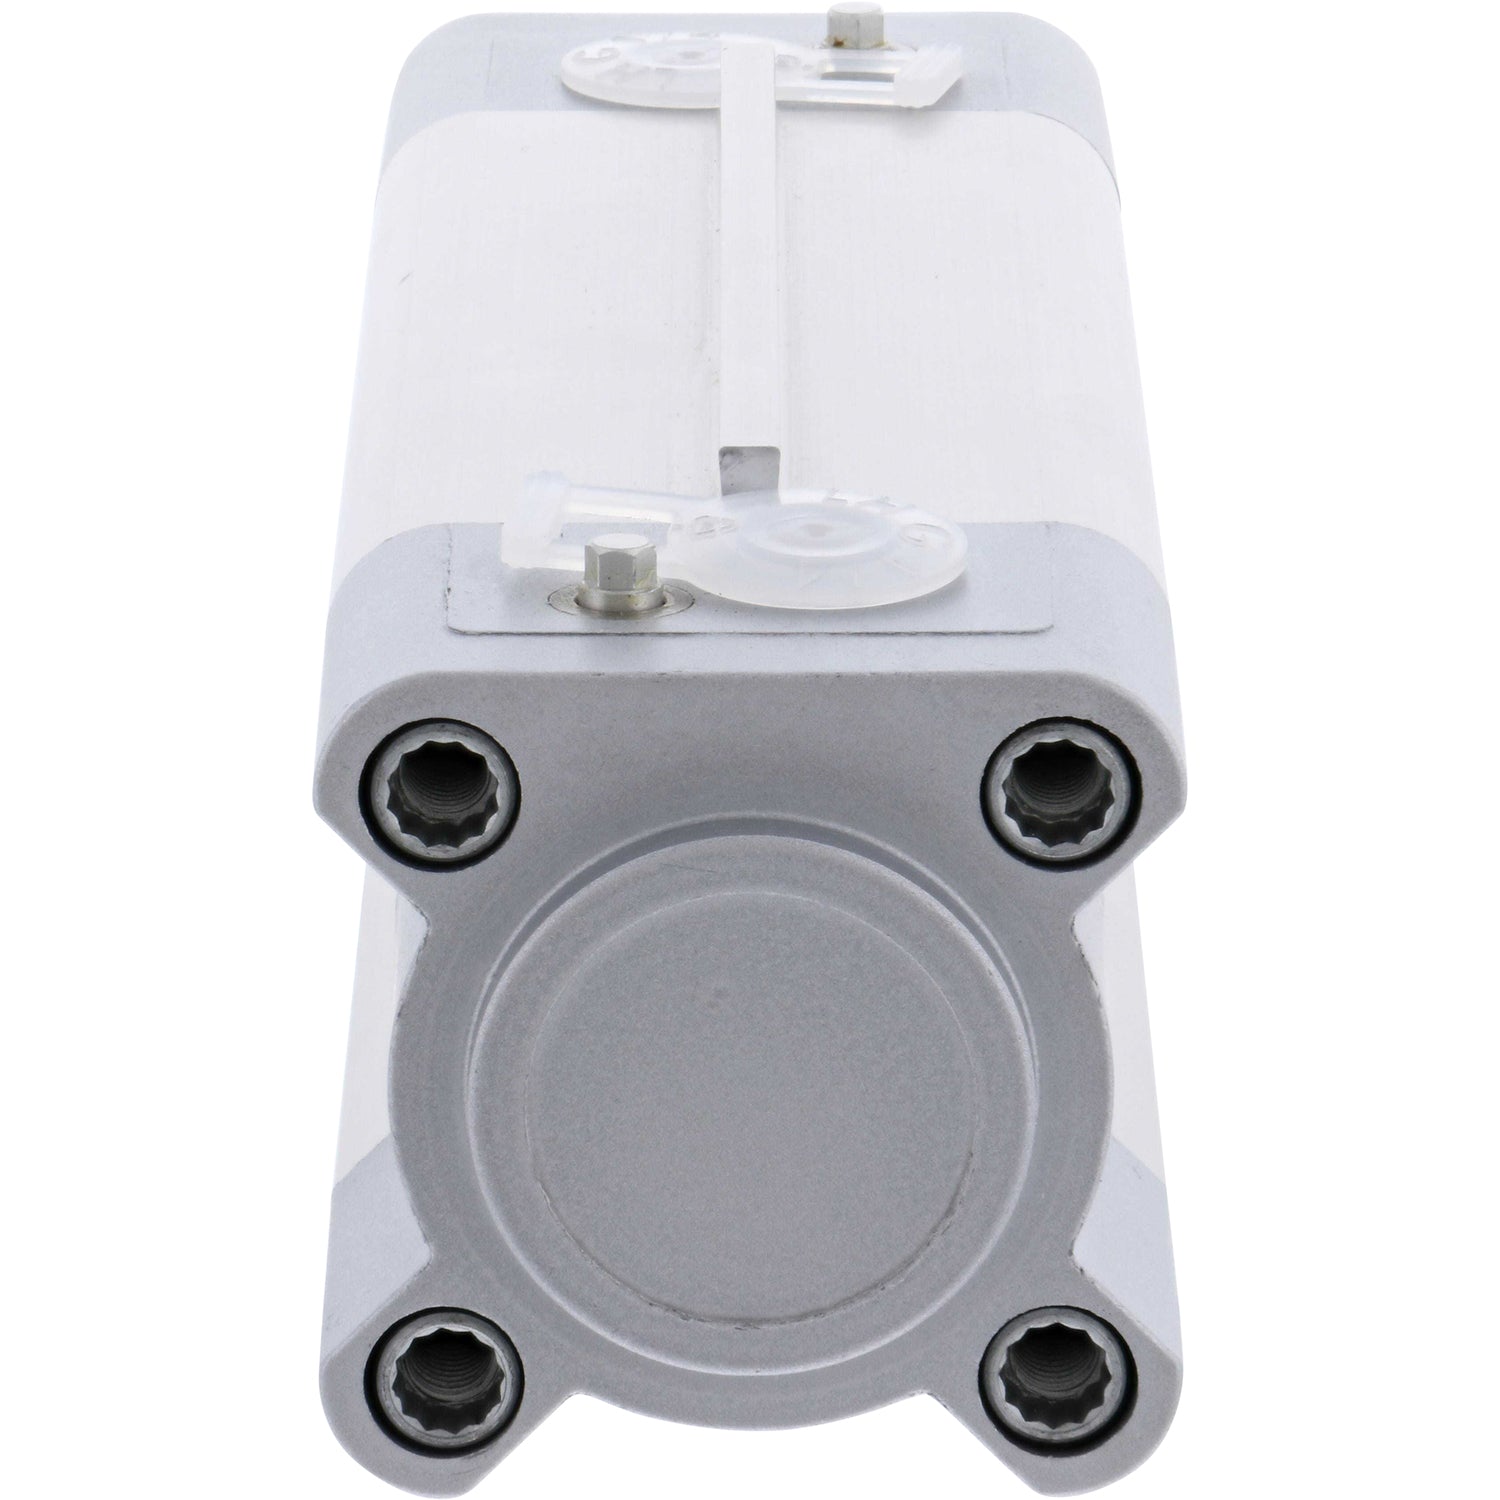 Pneumatic cylinder on white background. Cylinder's end cap is shown. 570078 DSBF-C-40-70-PPVA-A3-10E-R